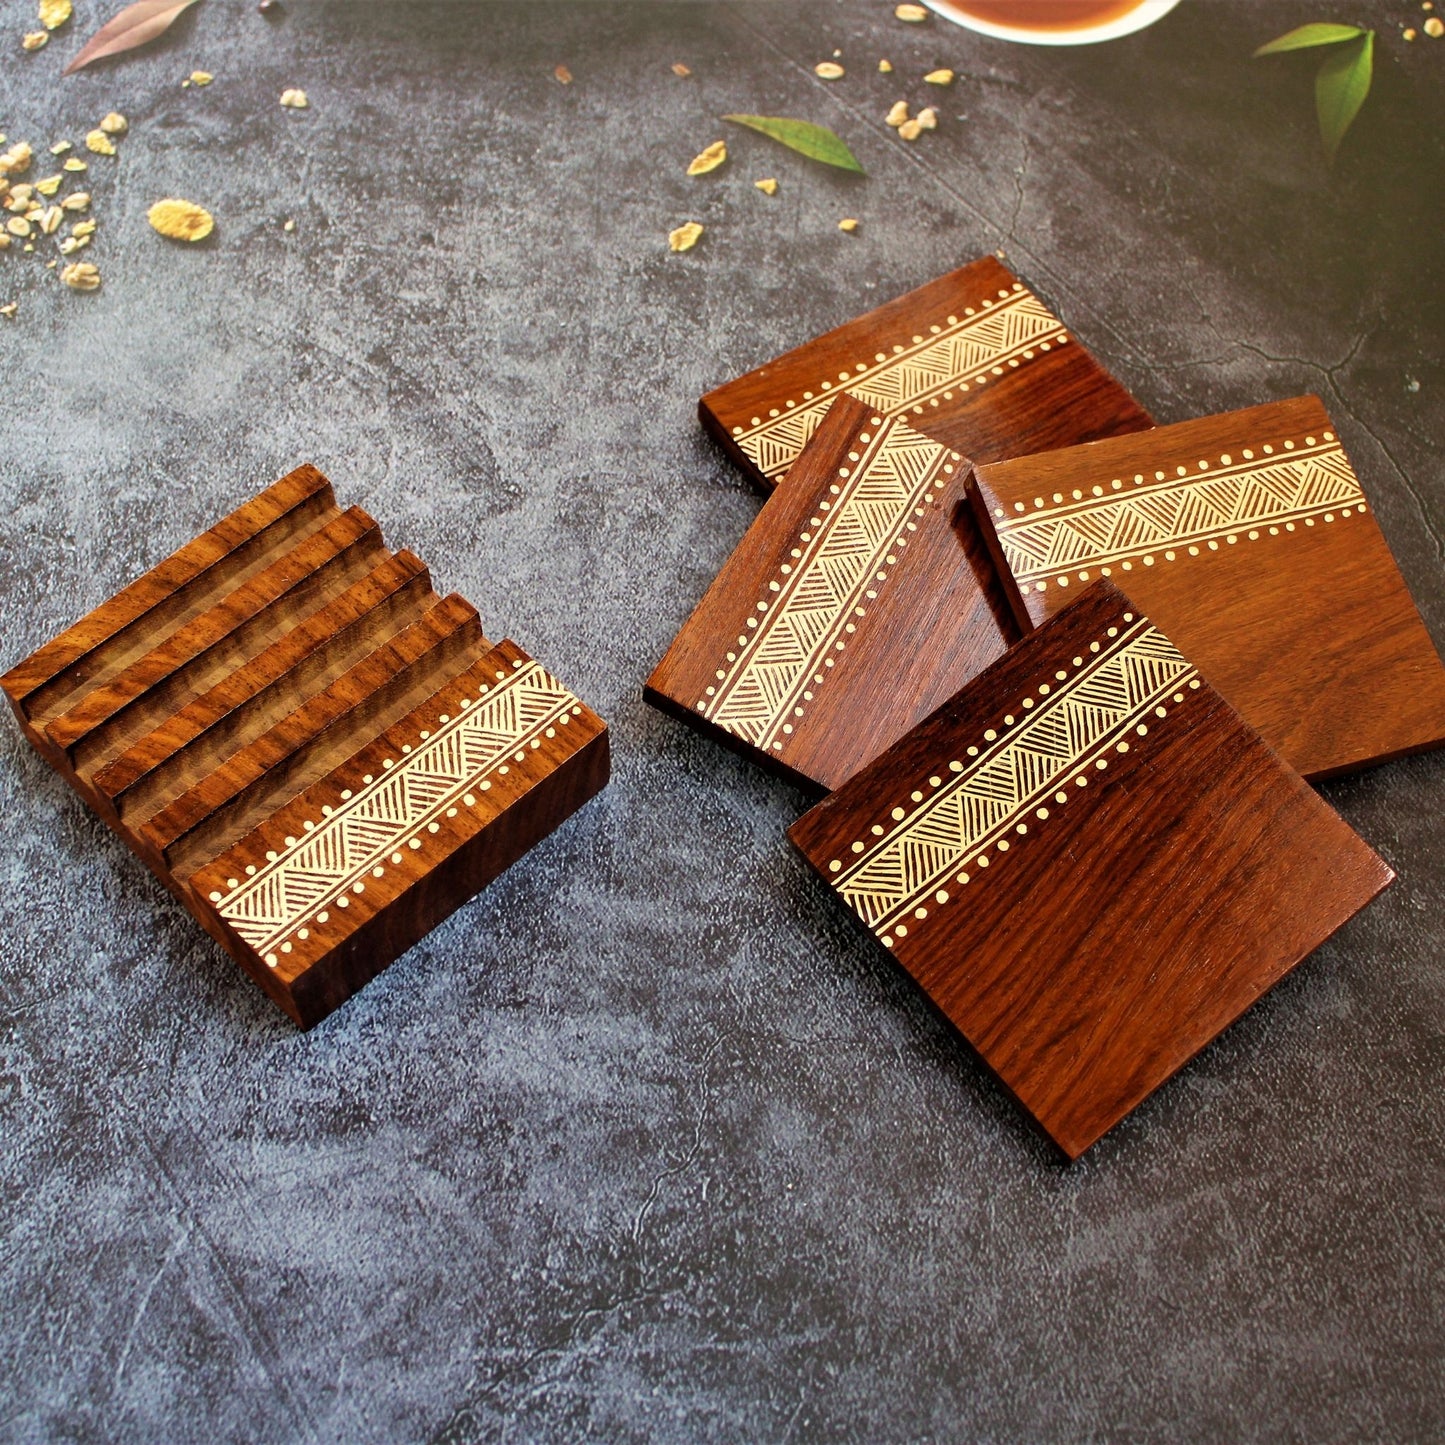 Indian Rosewood Hand Painted and Well Finished Coaster Set with Stand. It is a set of four coasters with hand painted aipan inspired design on them. 